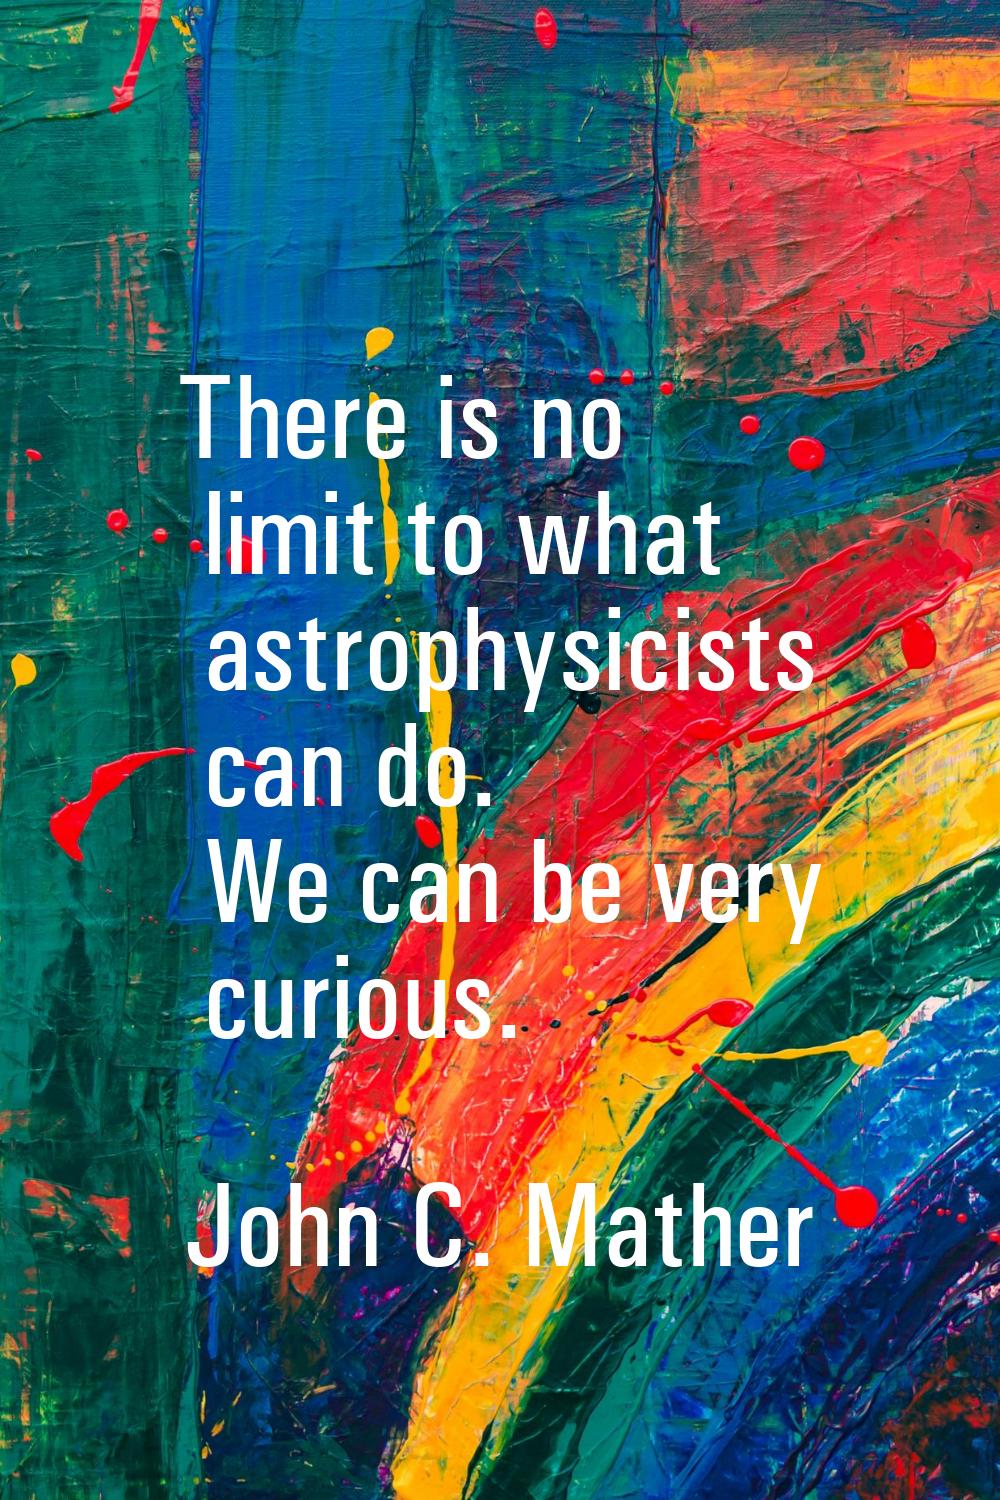 There is no limit to what astrophysicists can do. We can be very curious.